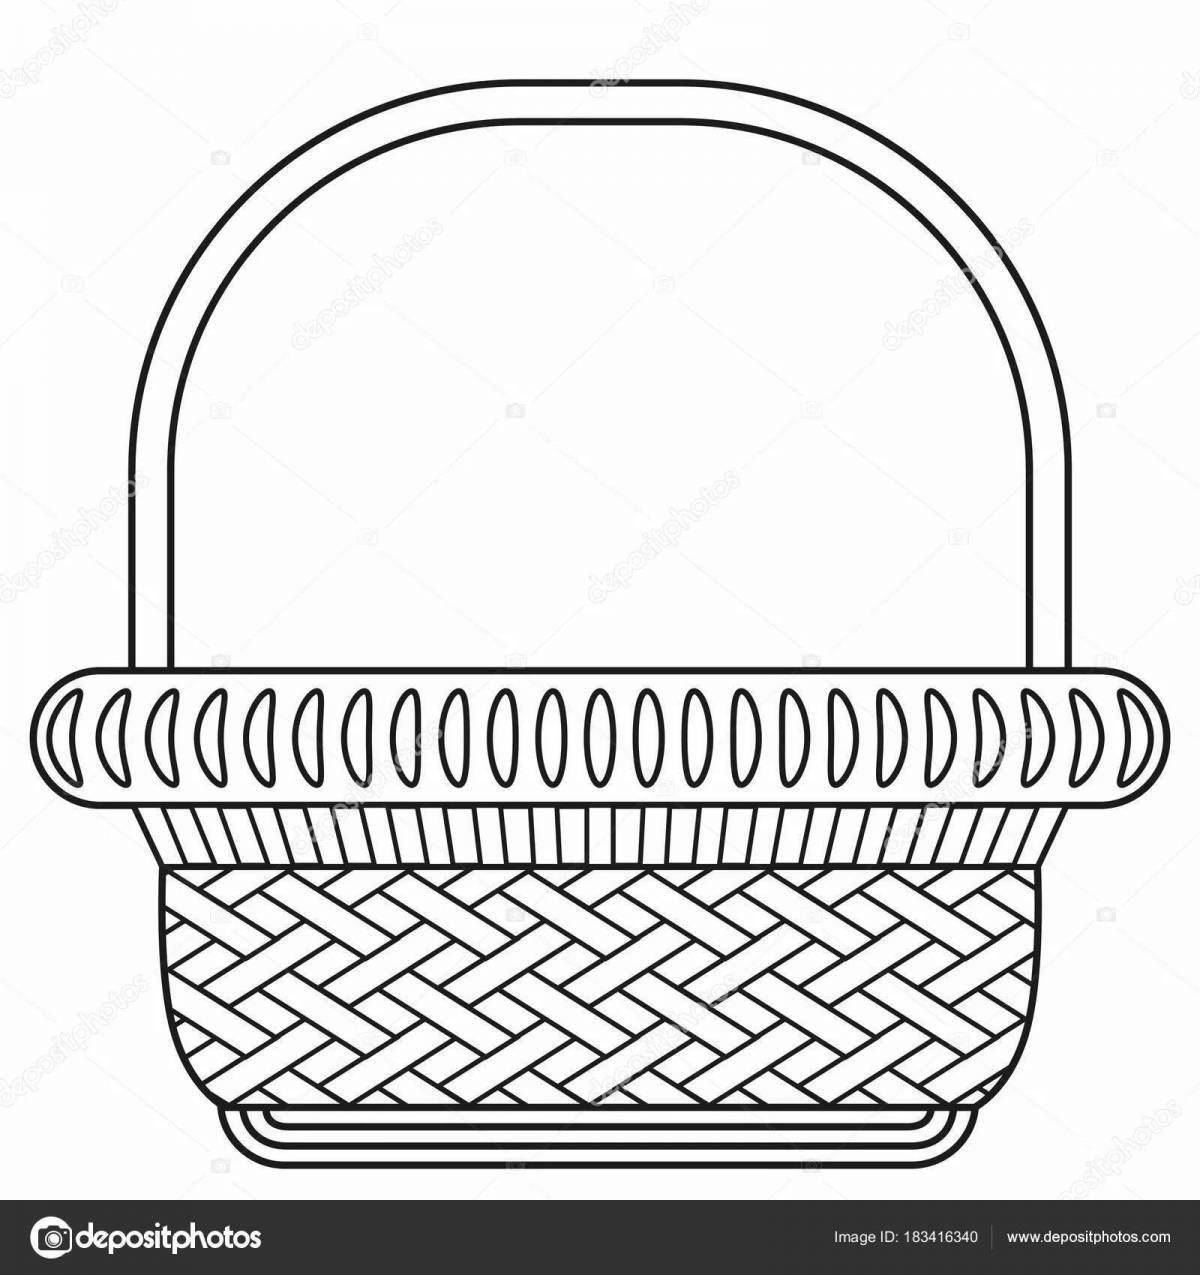 Sunny empty basket coloring book for kids